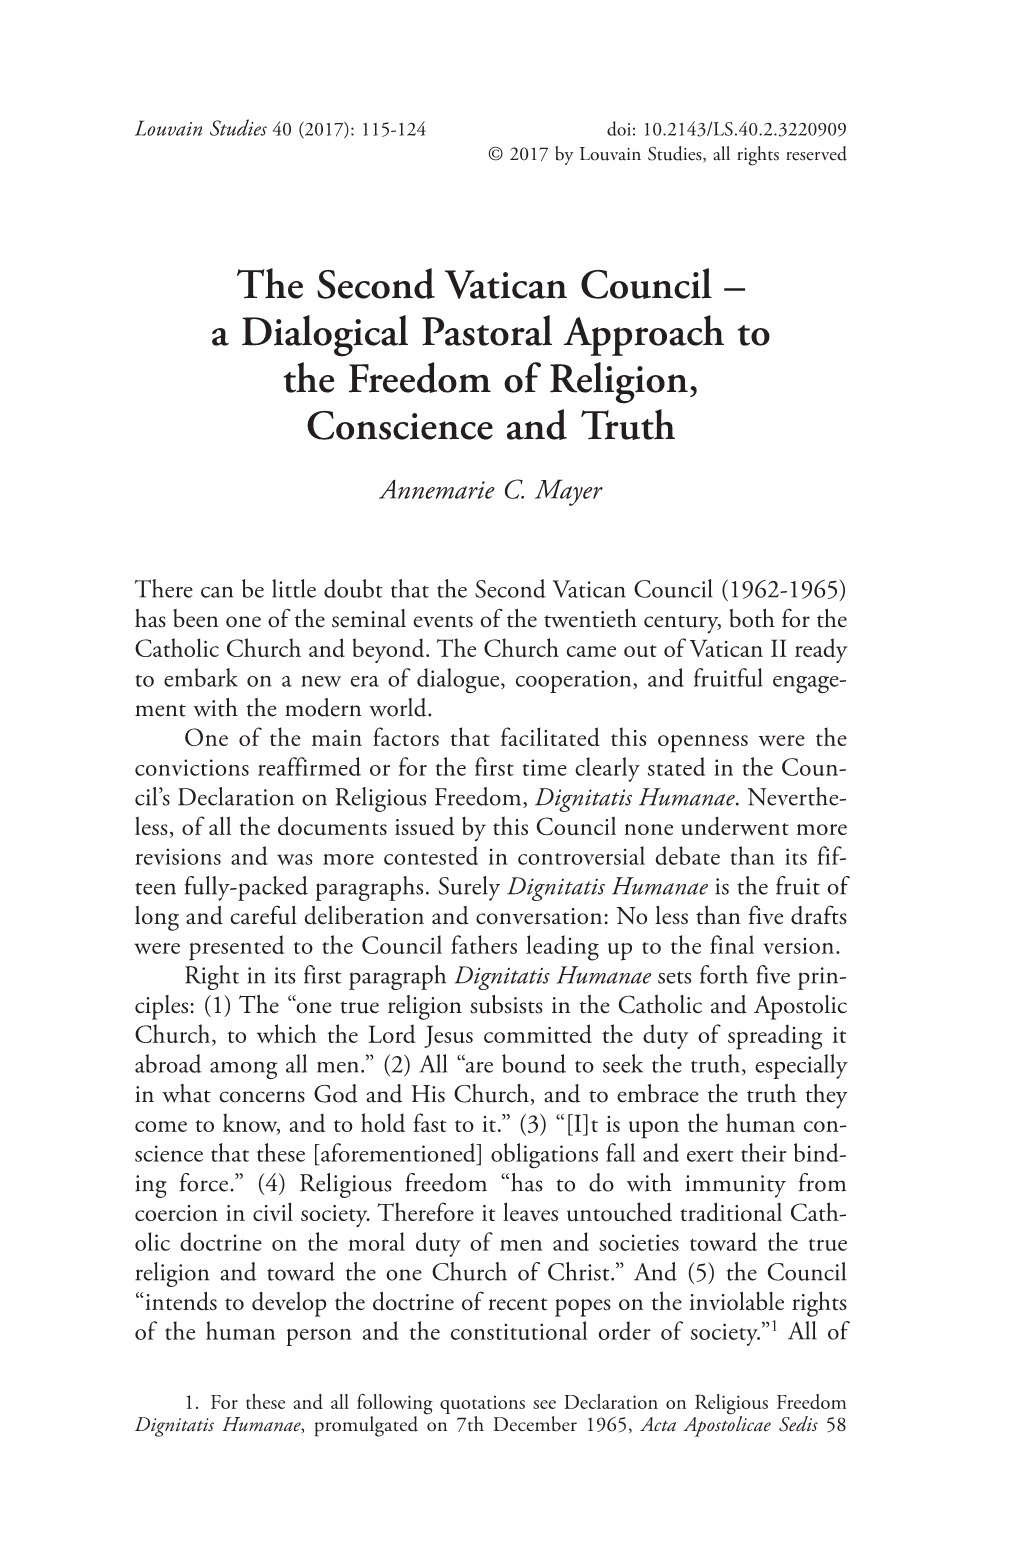 The Second Vatican Council – a Dialogical Pastoral Approach to the Freedom of Religion, Conscience and Truth